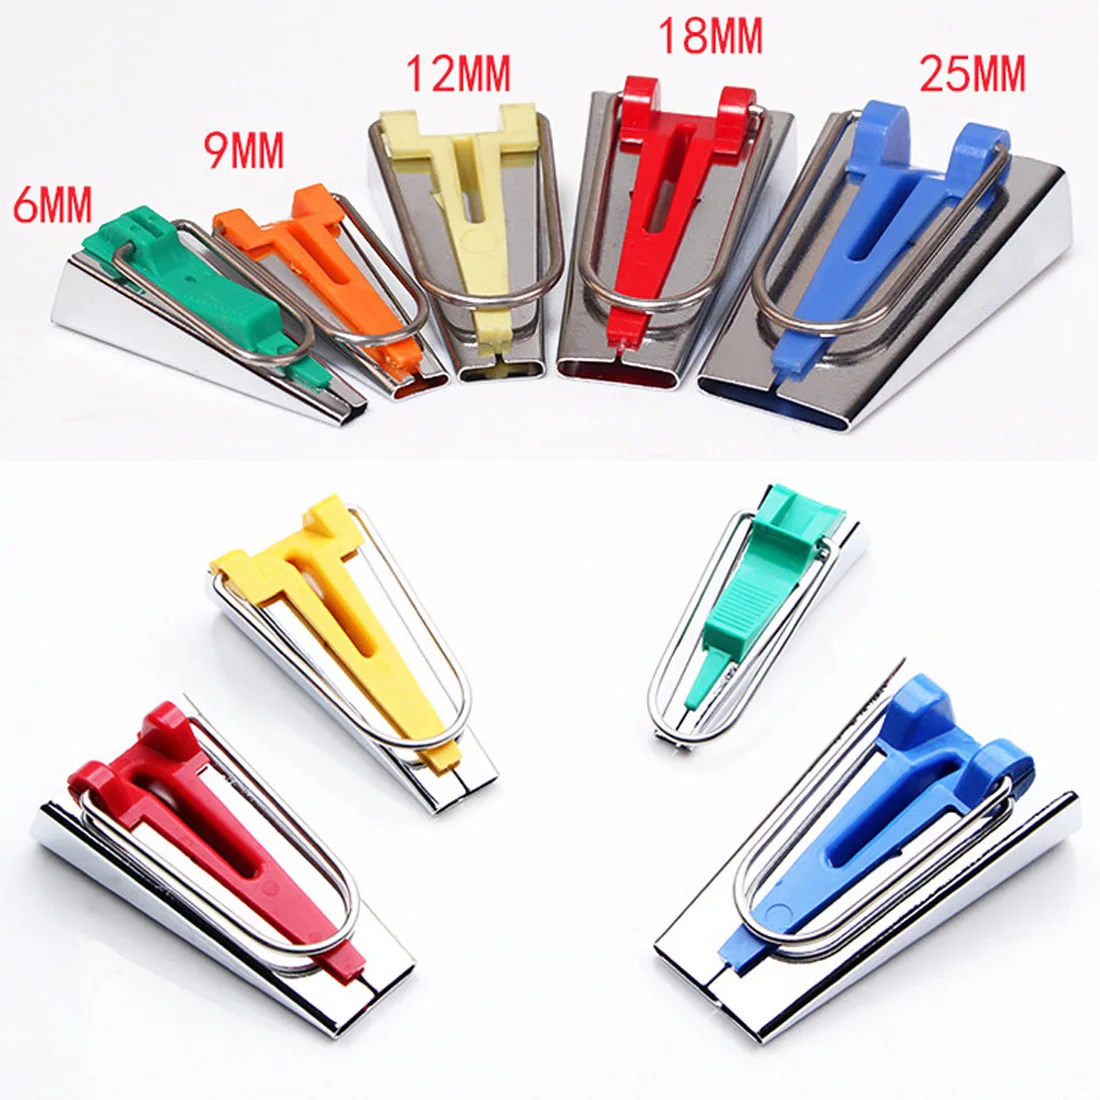 

1pcs 5 Sizes Fabric Bias Tape Maker Oblique Bias Tool Sewing Quilting Binding Maker Sewing Machine Foot 6mm 9mm 12mm 18mm 25mm